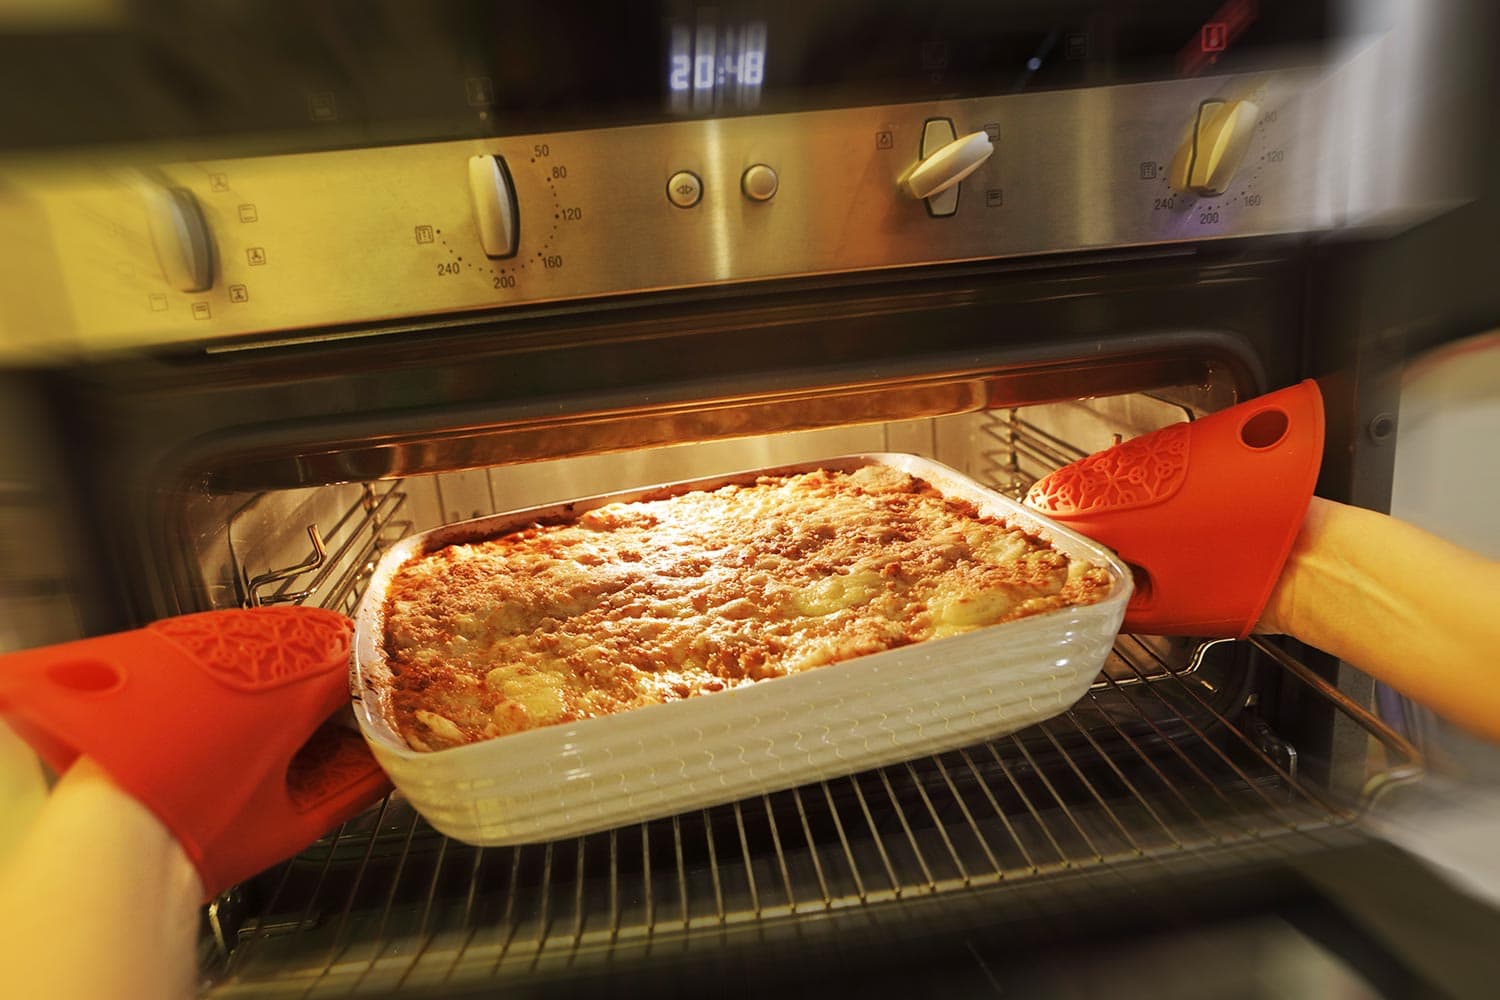 The lasagna is hot and illuminated by the oven light